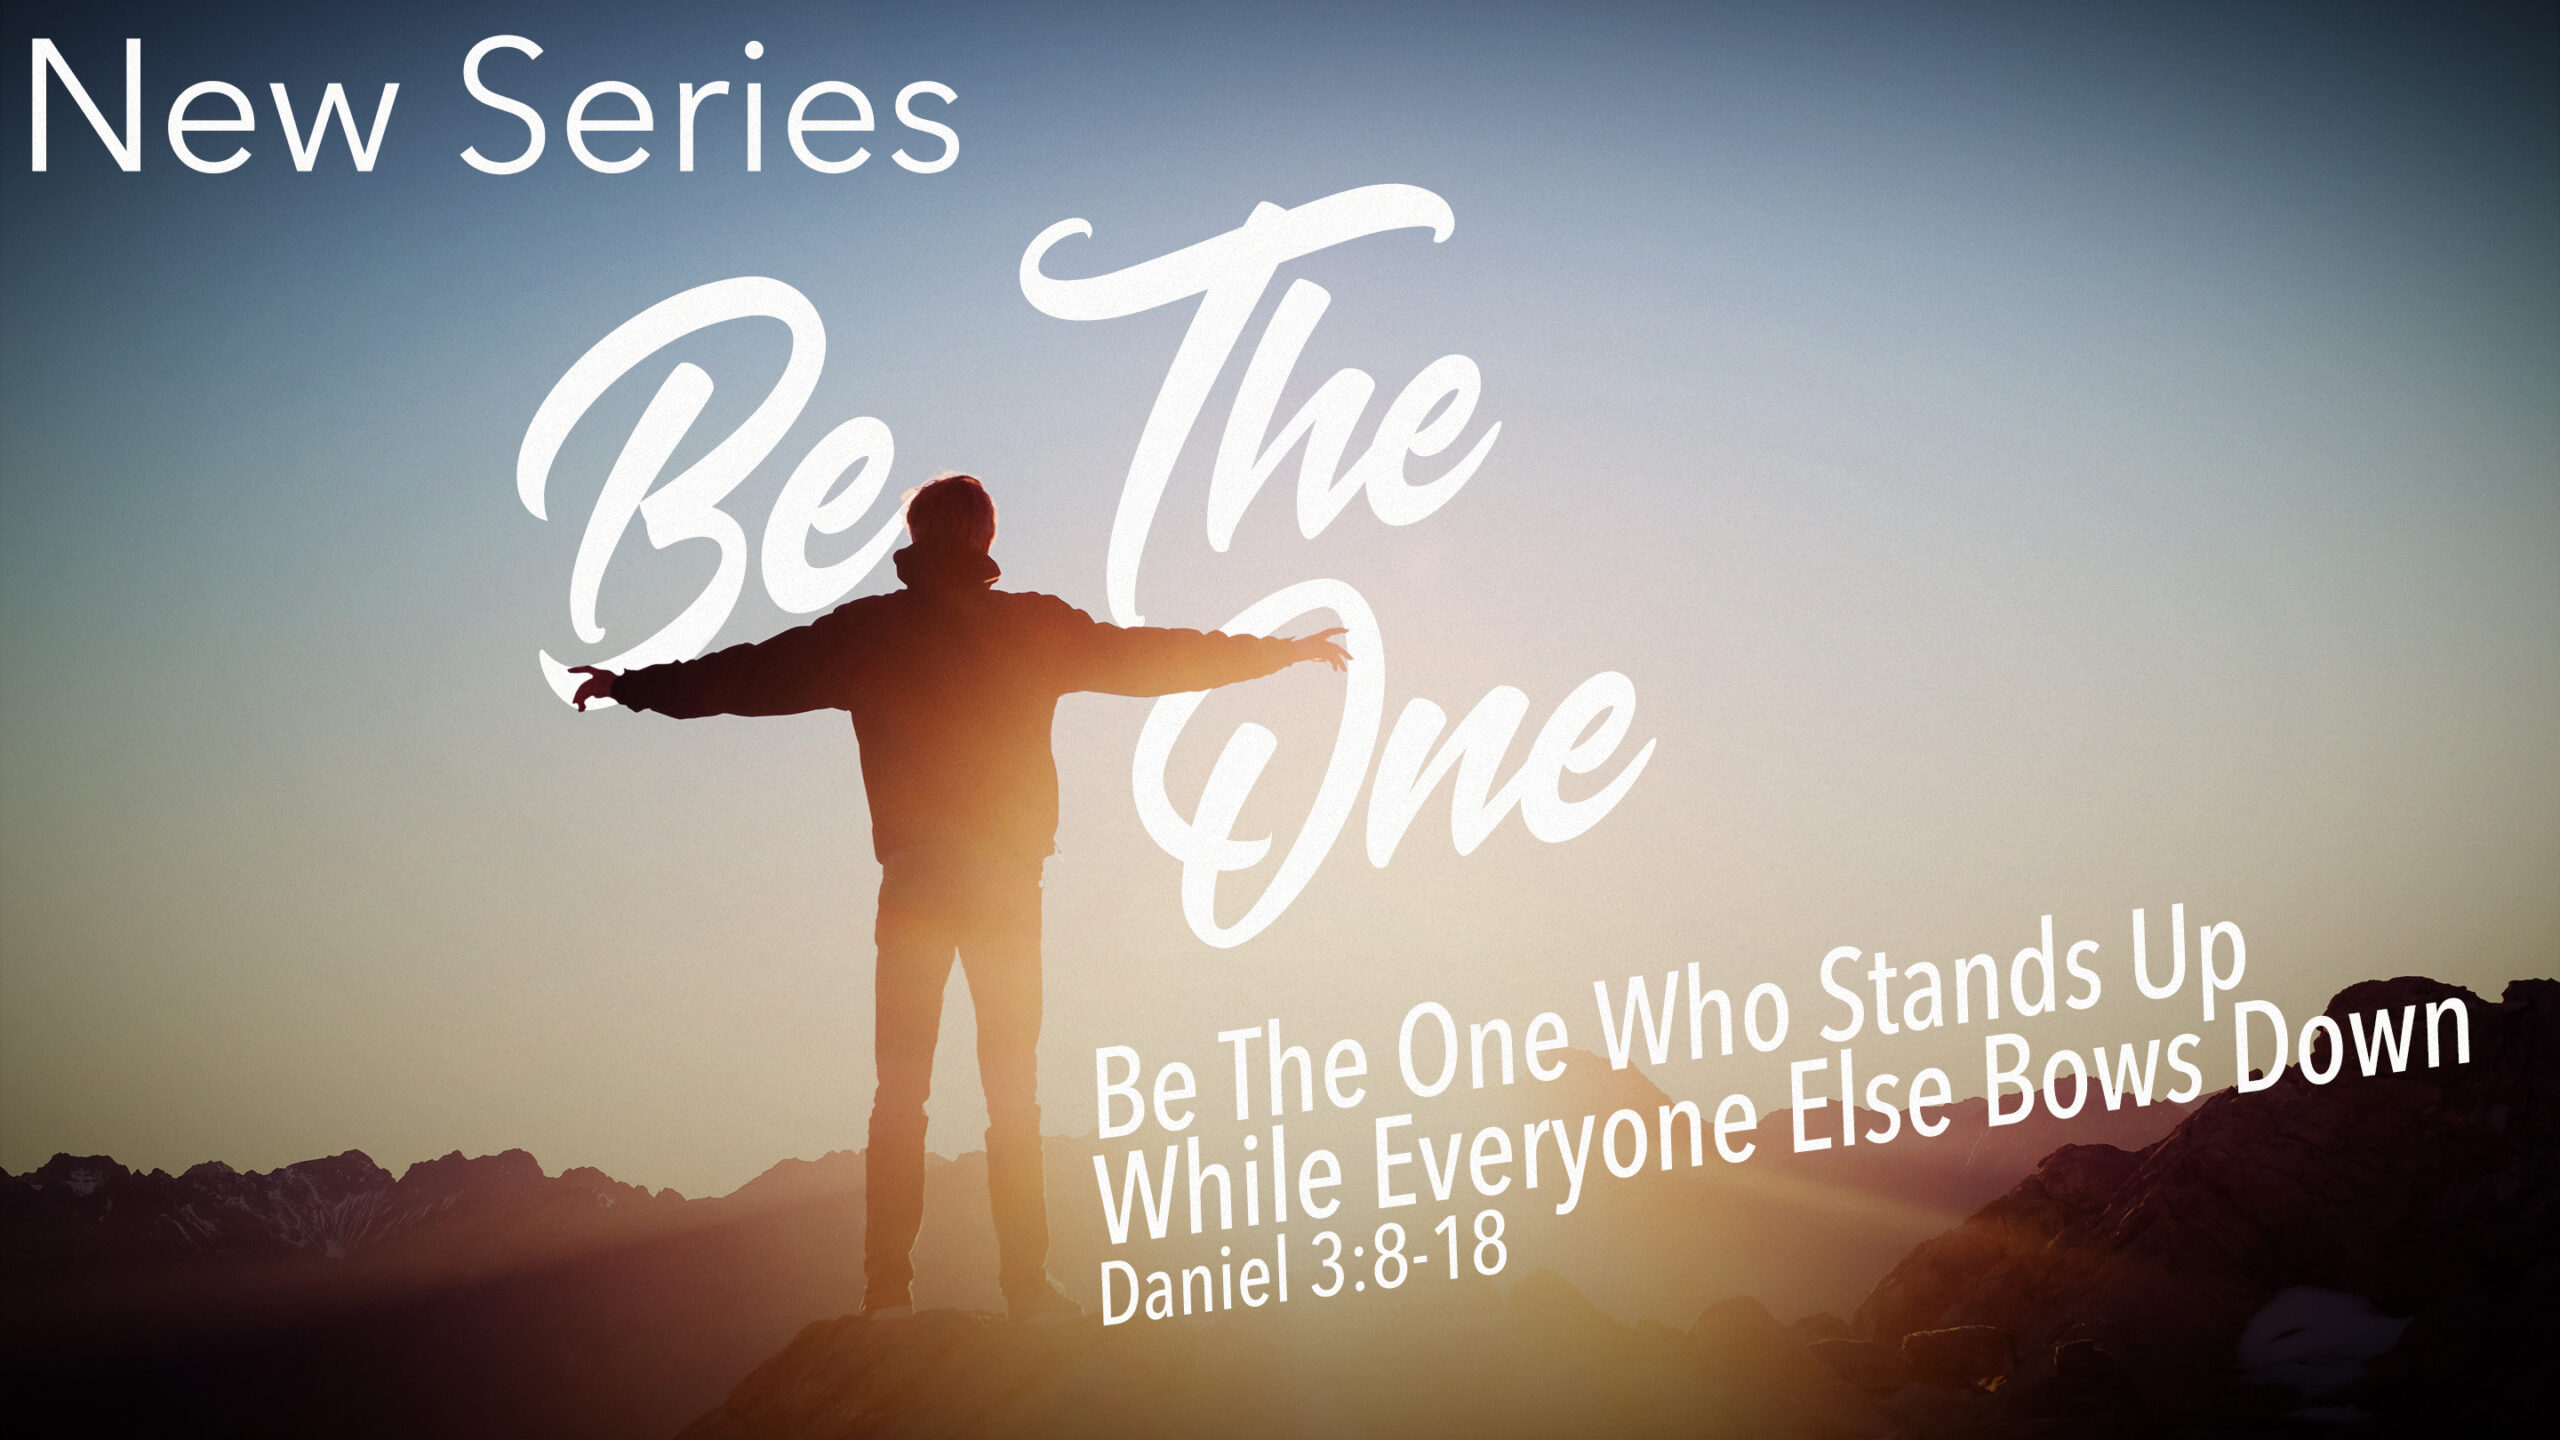 Be The One Part 1 “Be The One Who Stands Up While Everyone Else Bows Down” (Traditional)